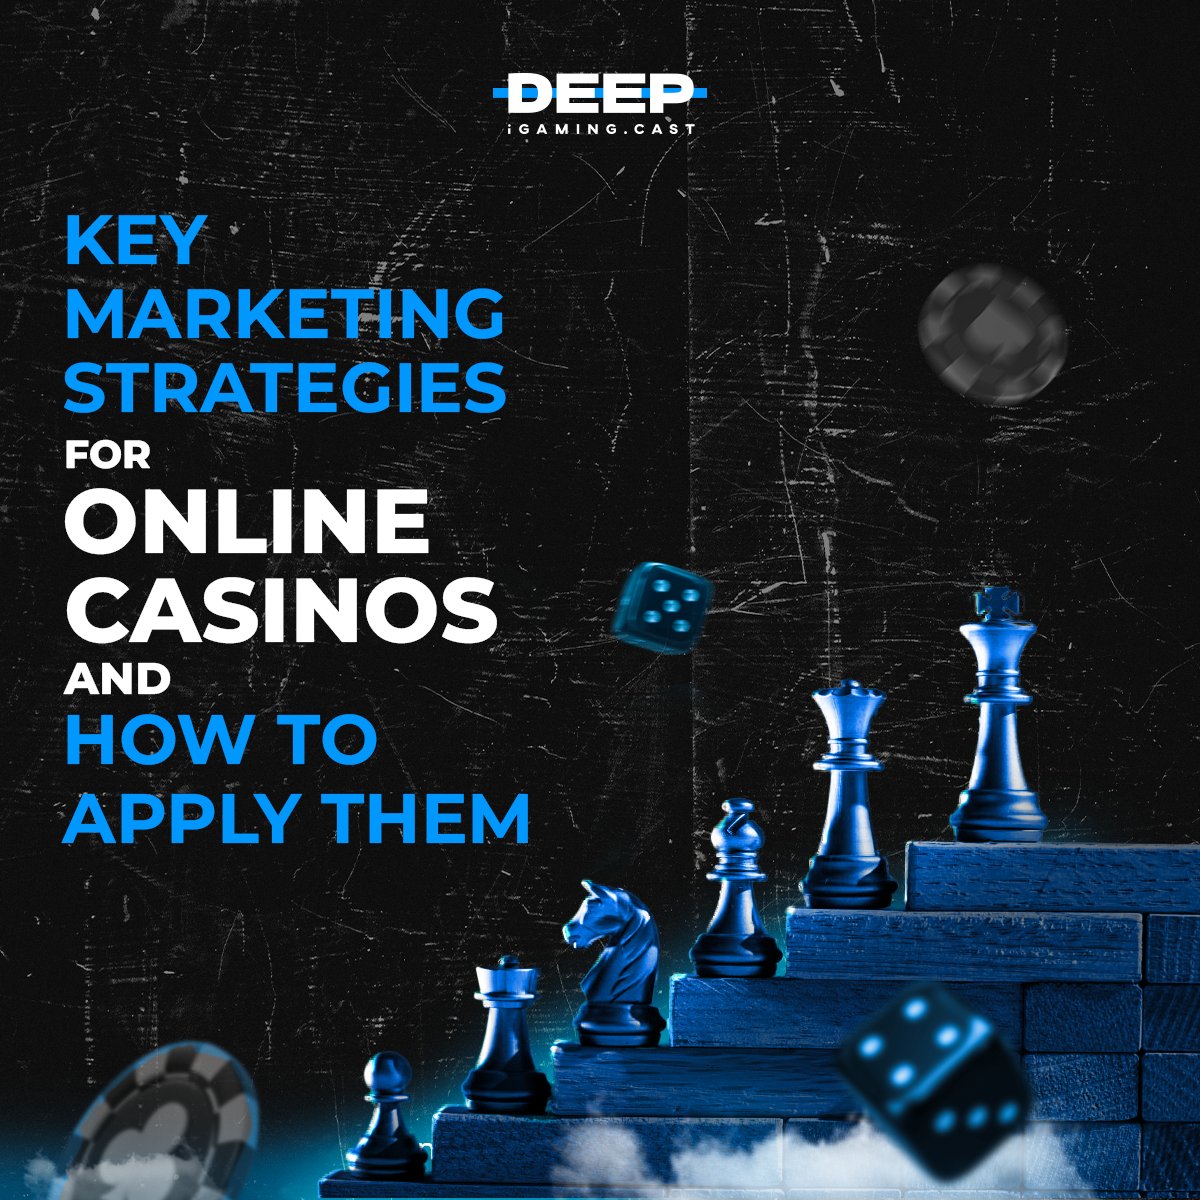 Market research, social media marketing, and LinkedIn participation are just a few of the marketing tactics.

Learn how to successfully grow your online casino business using the most recent iGaming marketing techniques.

 #igaming #casinomarketing #deepcast